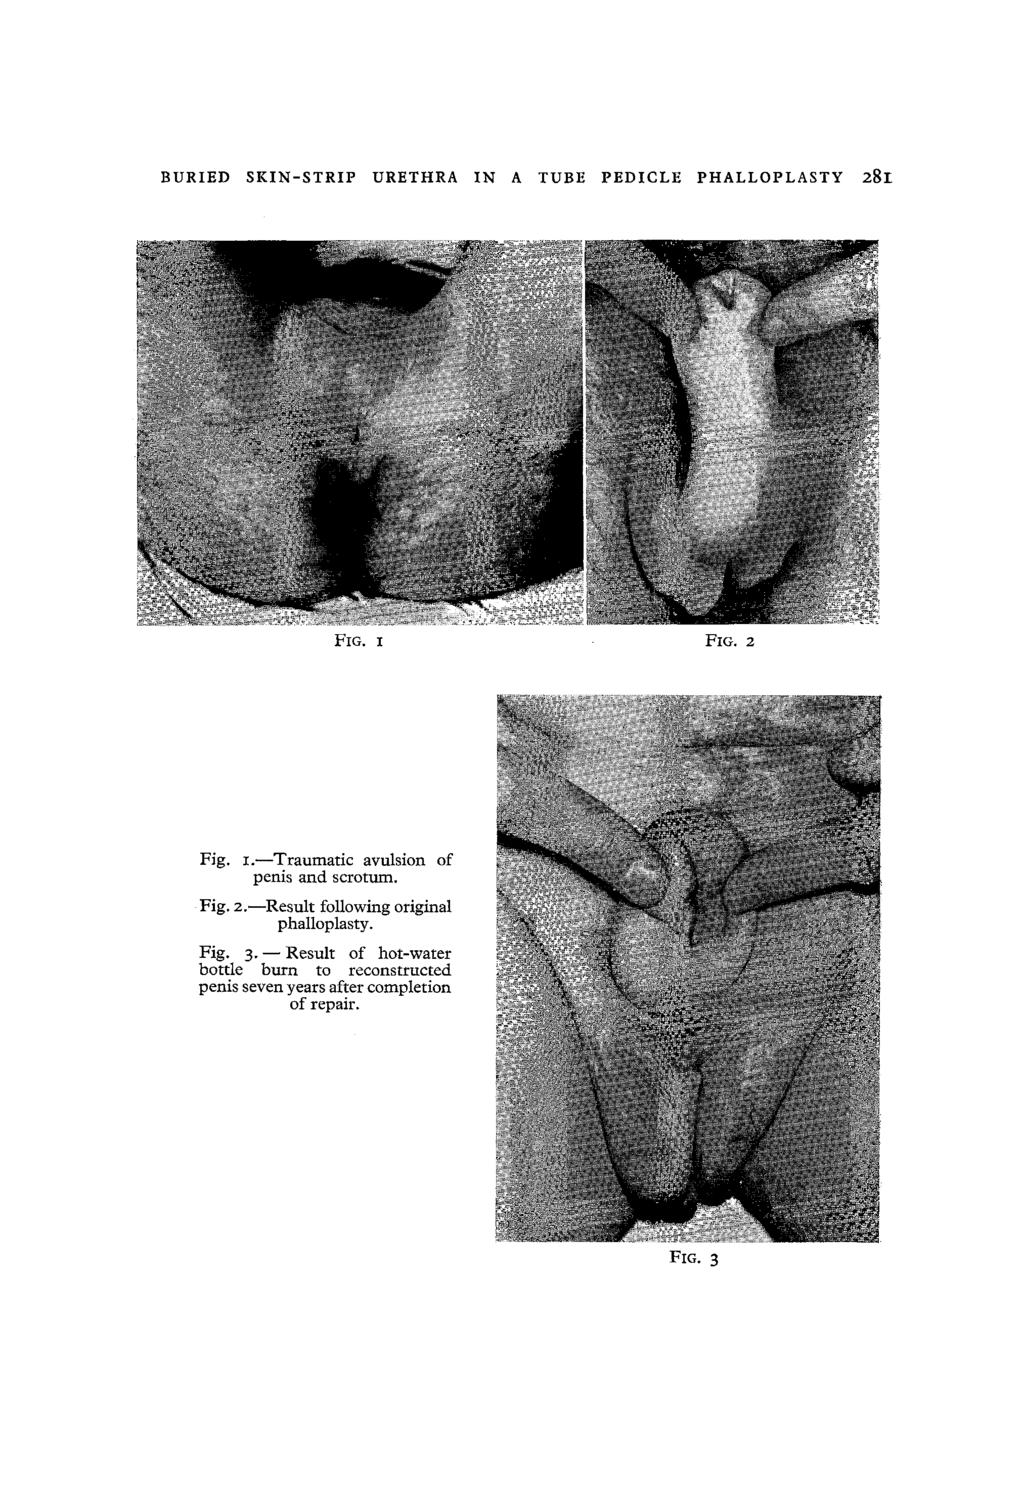 BURIED SKIN-STRIP URETHRA IN A TUBE PEDICLE PHALLOPLASTY 281 Fie. x Fro. 2 Fig. I.--Traumatic avulsion of penis and scrotum. Fig. 2.--Result following original phalloplasty.